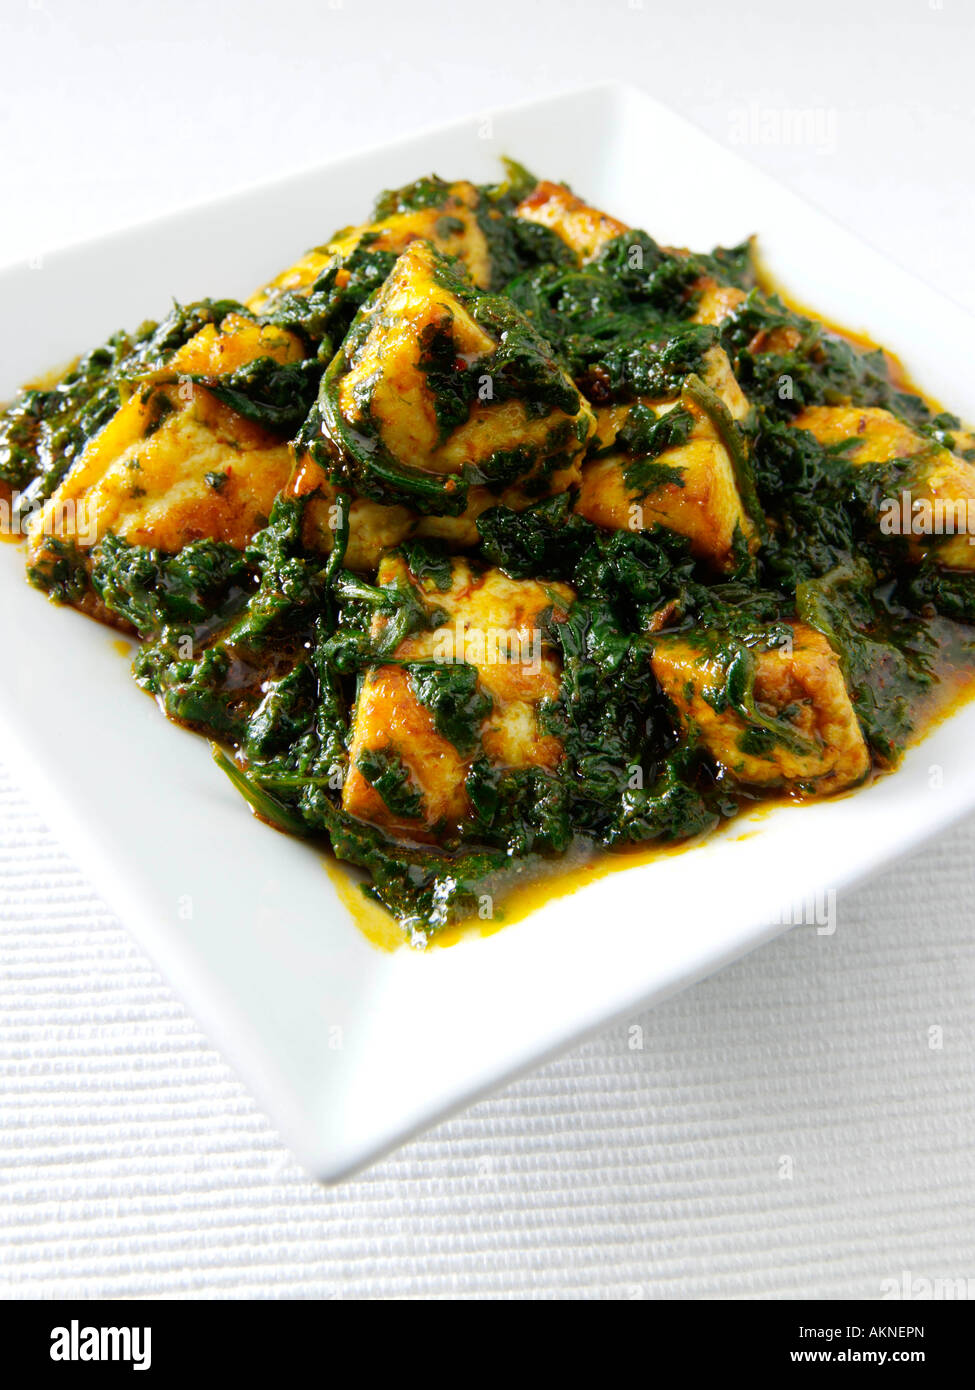 A dish of spicy Indian palak paneer editorial food Stock Photo